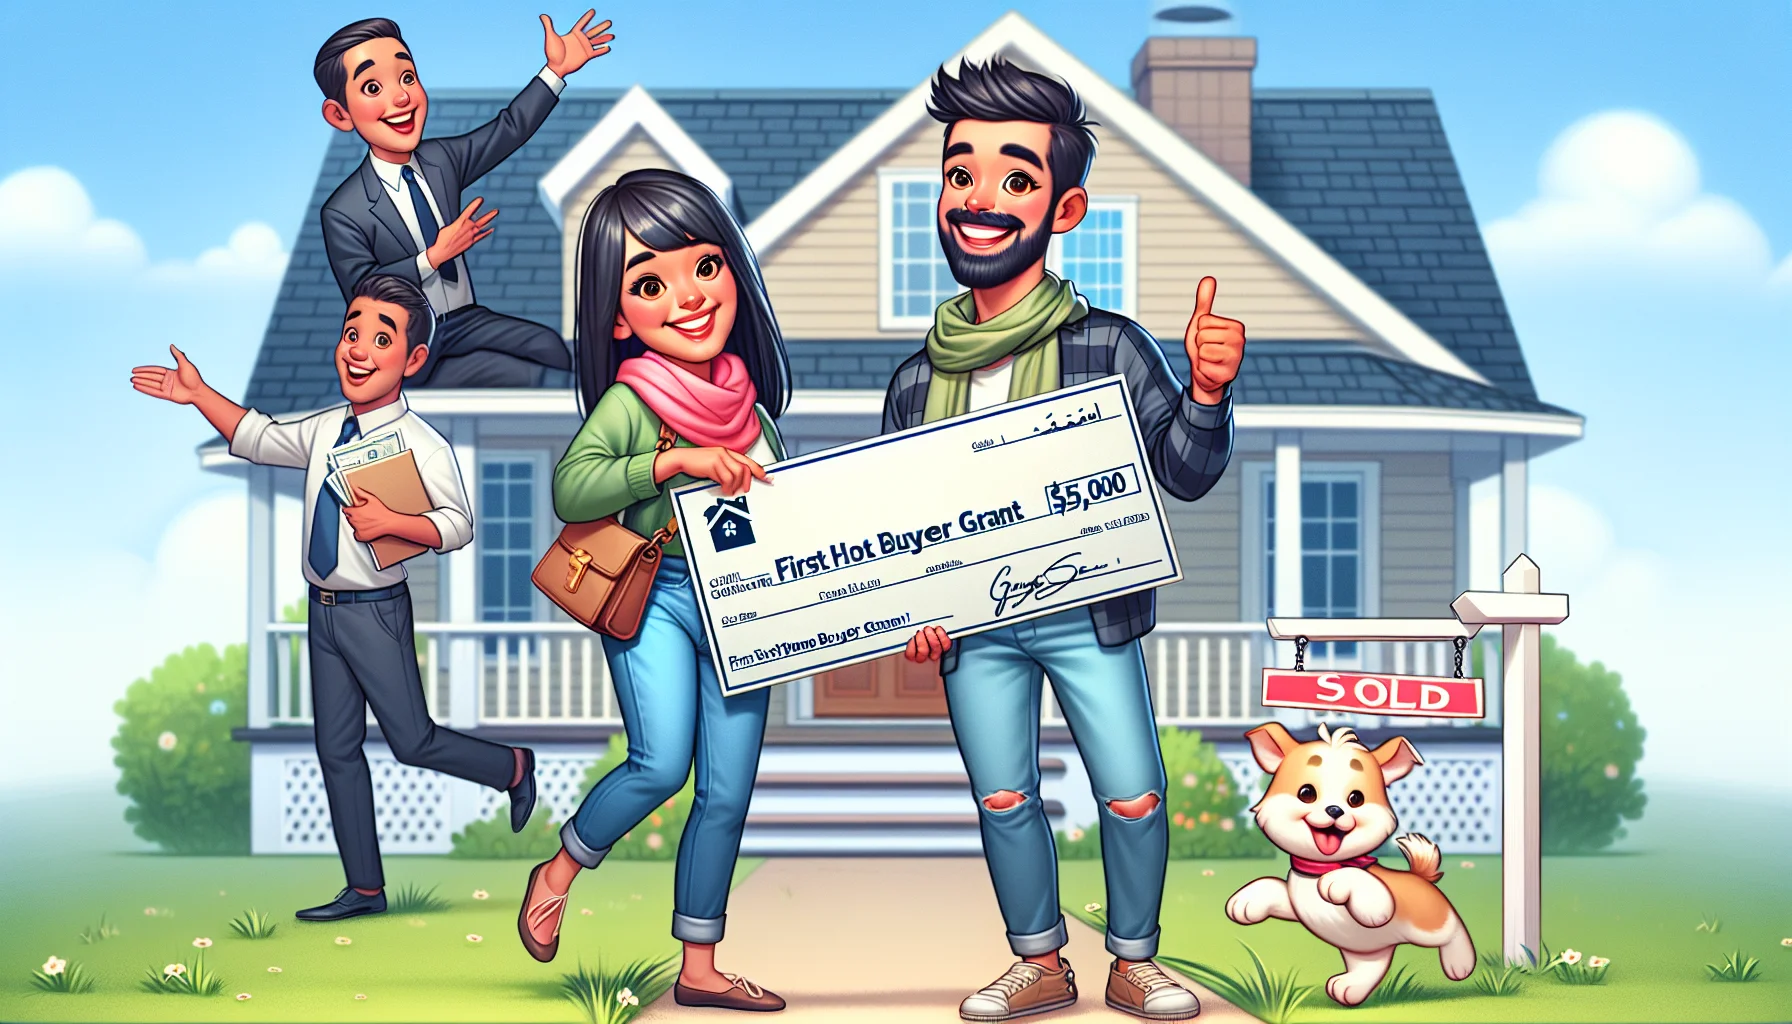 Create a light-hearted and highly realistic scene showing an ideal scenario for a first-time home buyer benefitting from a $5,000 grant. In this scene, a South Asian woman and a Middle-Eastern man, both in their late twenties and dressed in casual attire, joyfully hold a large symbolic check marked '$5,000 First Home Buyer Grant'. Behind them is a charming, quaint two-story home with a 'sold' sign in the yard. They are surrounded by a friendly real estate agent, pointing towards the house and smiling, and their little pet dog, skipping around excitedly.